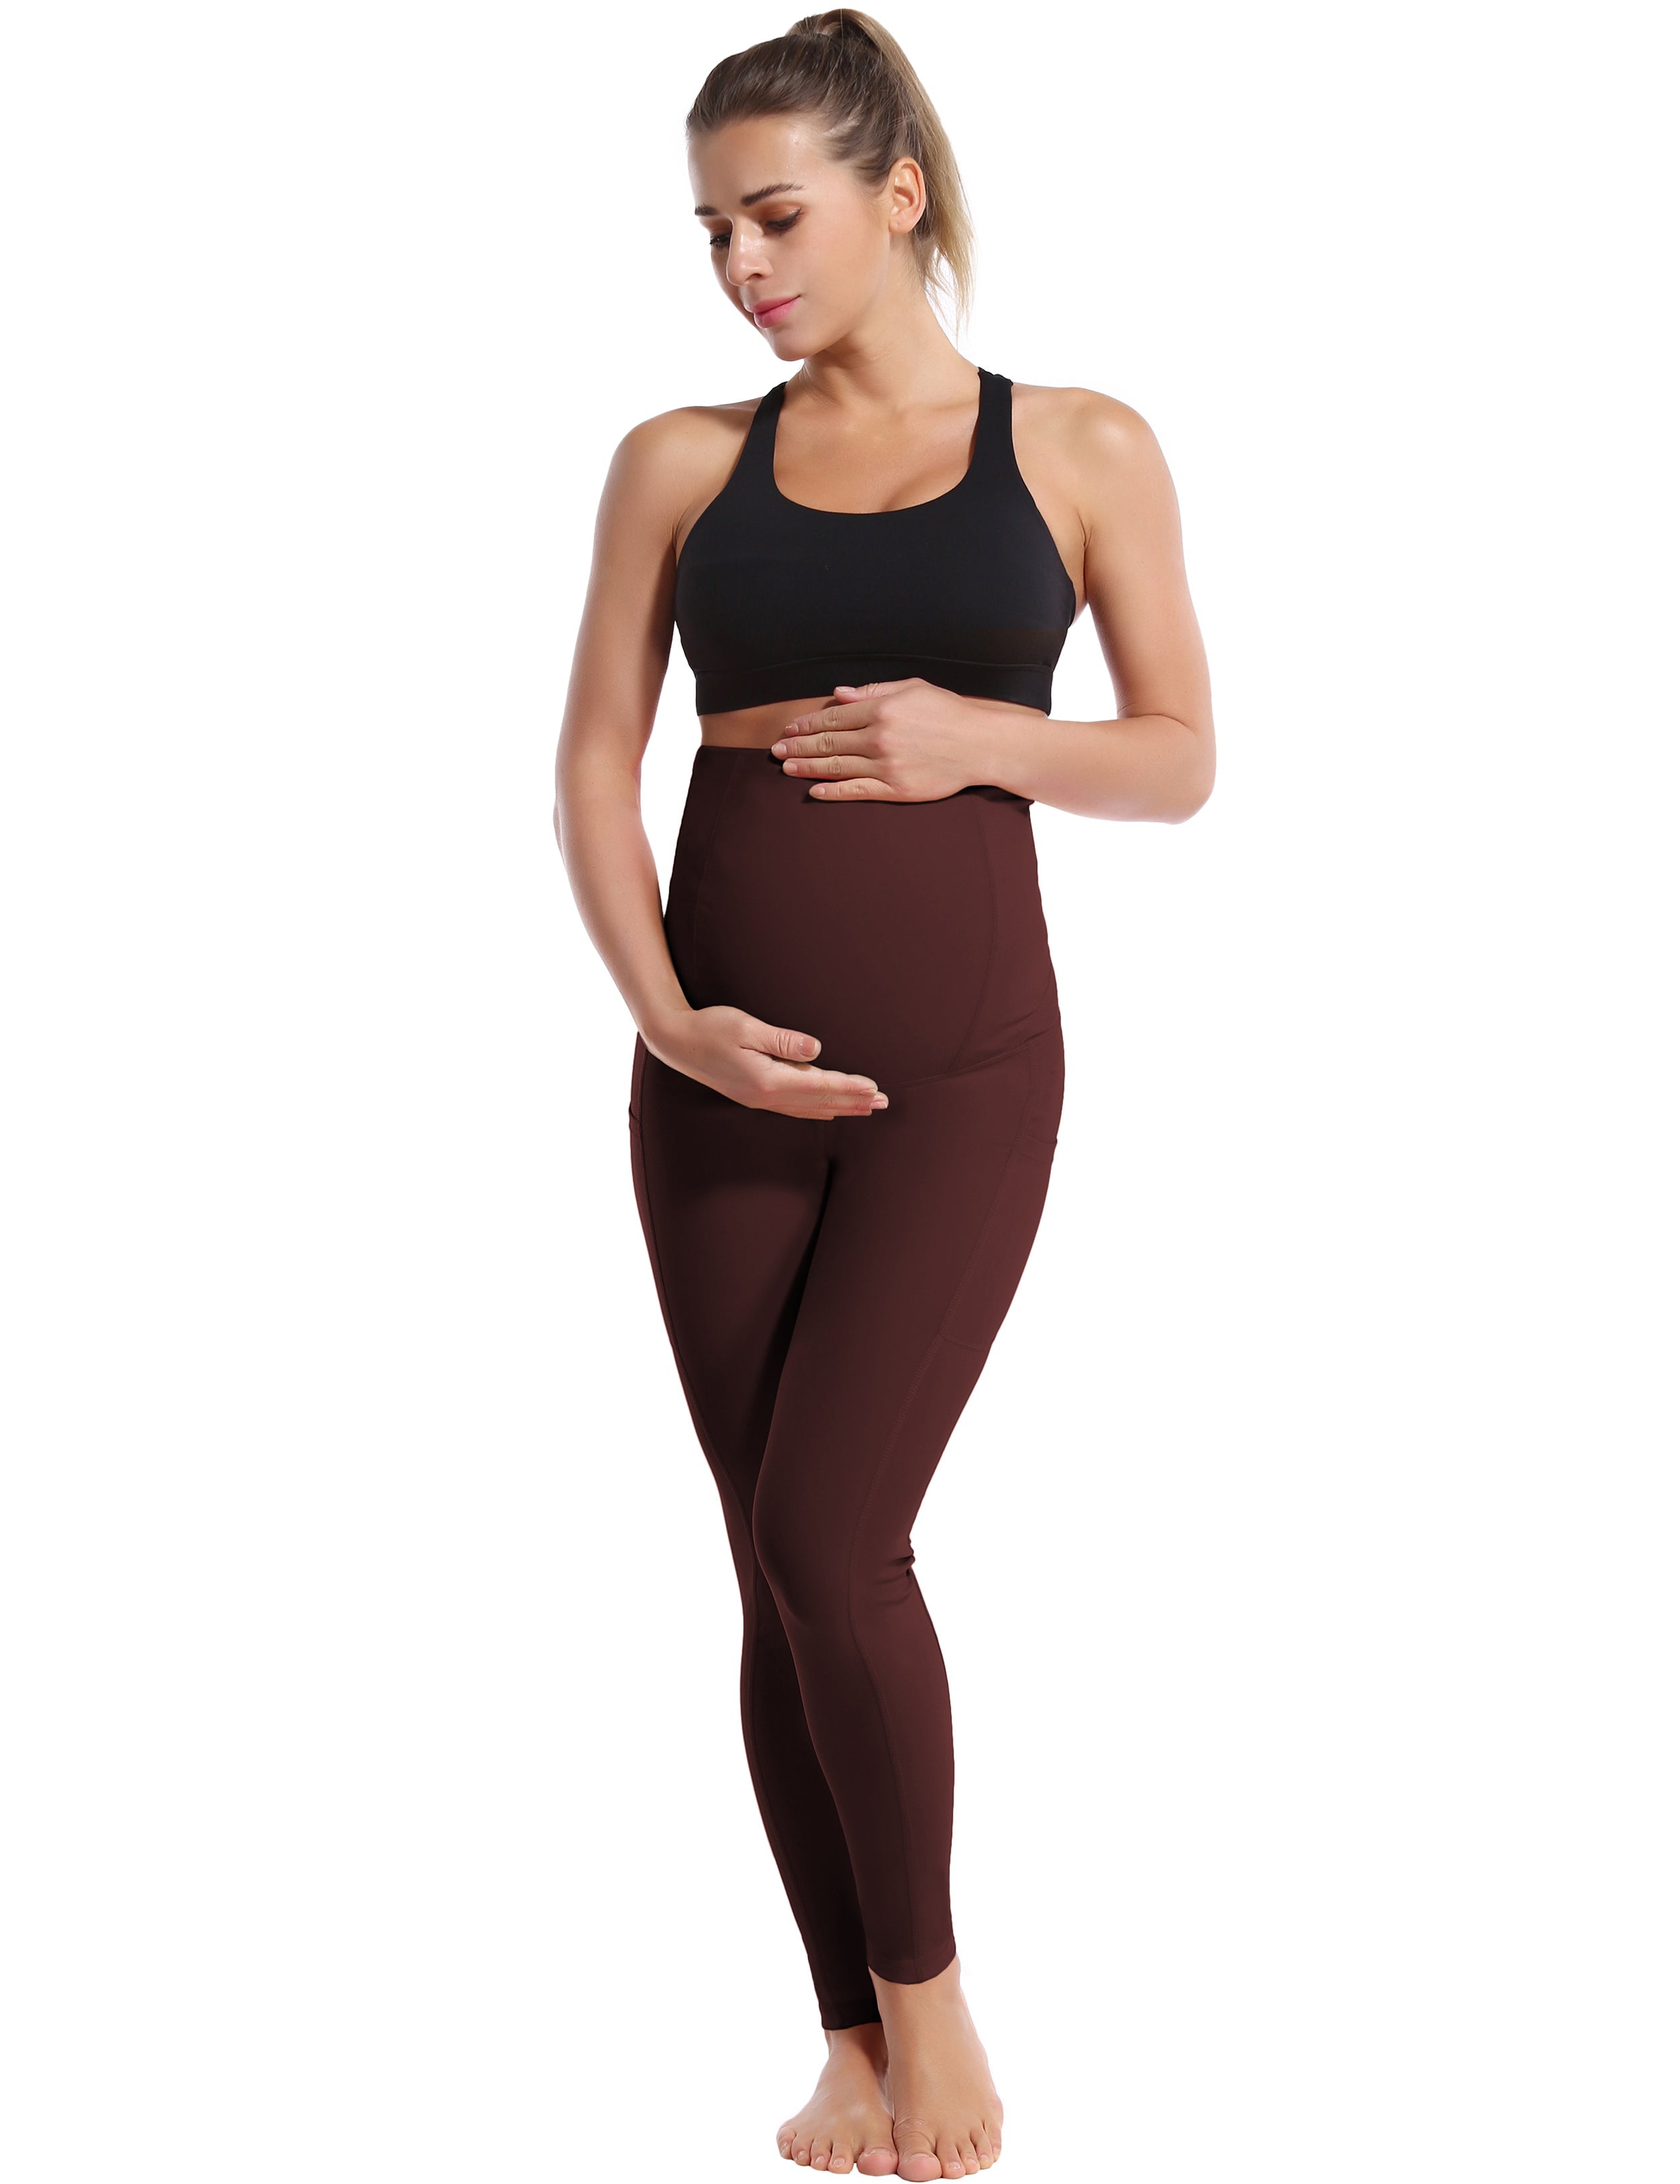 26" Side Pockets Maternity Golf Pants mahoganymaroon 87%Nylon/13%Spandex Softest-ever fabric High elasticity 4-way stretch Fabric doesn't attract lint easily No see-through Moisture-wicking Machine wash